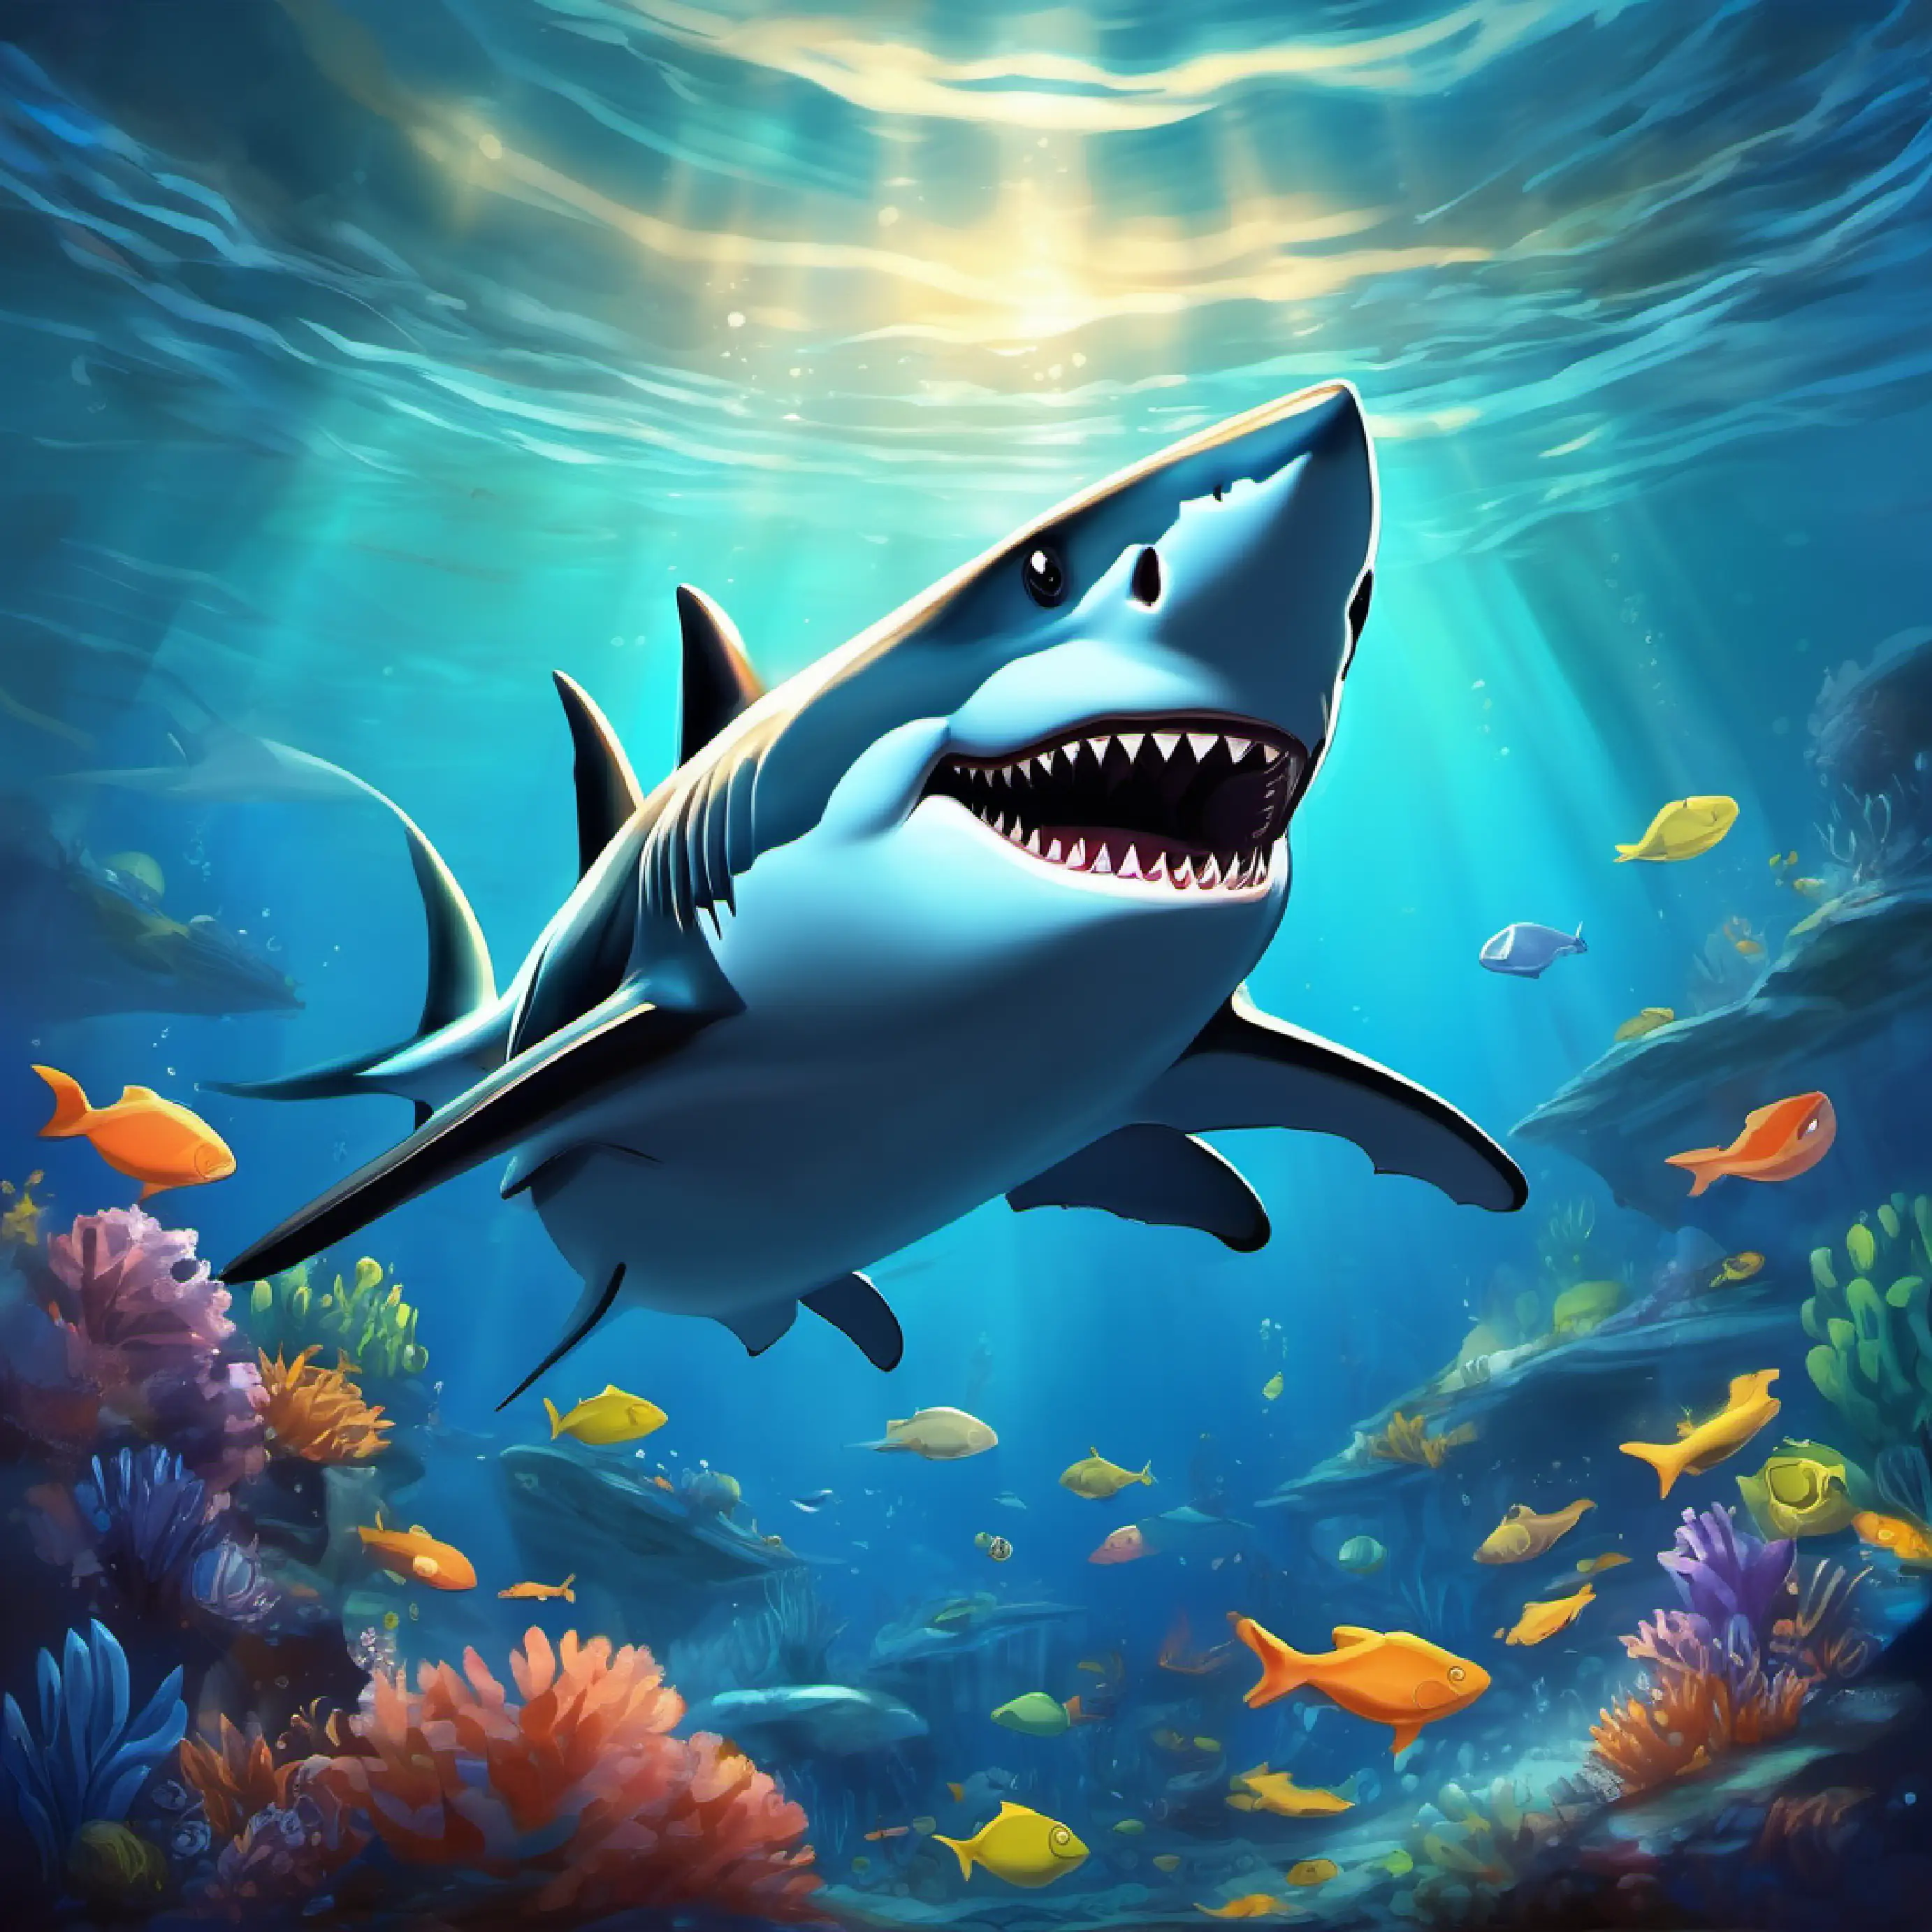 Underwater world, introducing Big, friendly shark with a shiny smile Blue-gray skin, bright twinkling eyes, tooth-brushing superhero. Nighttime setting.